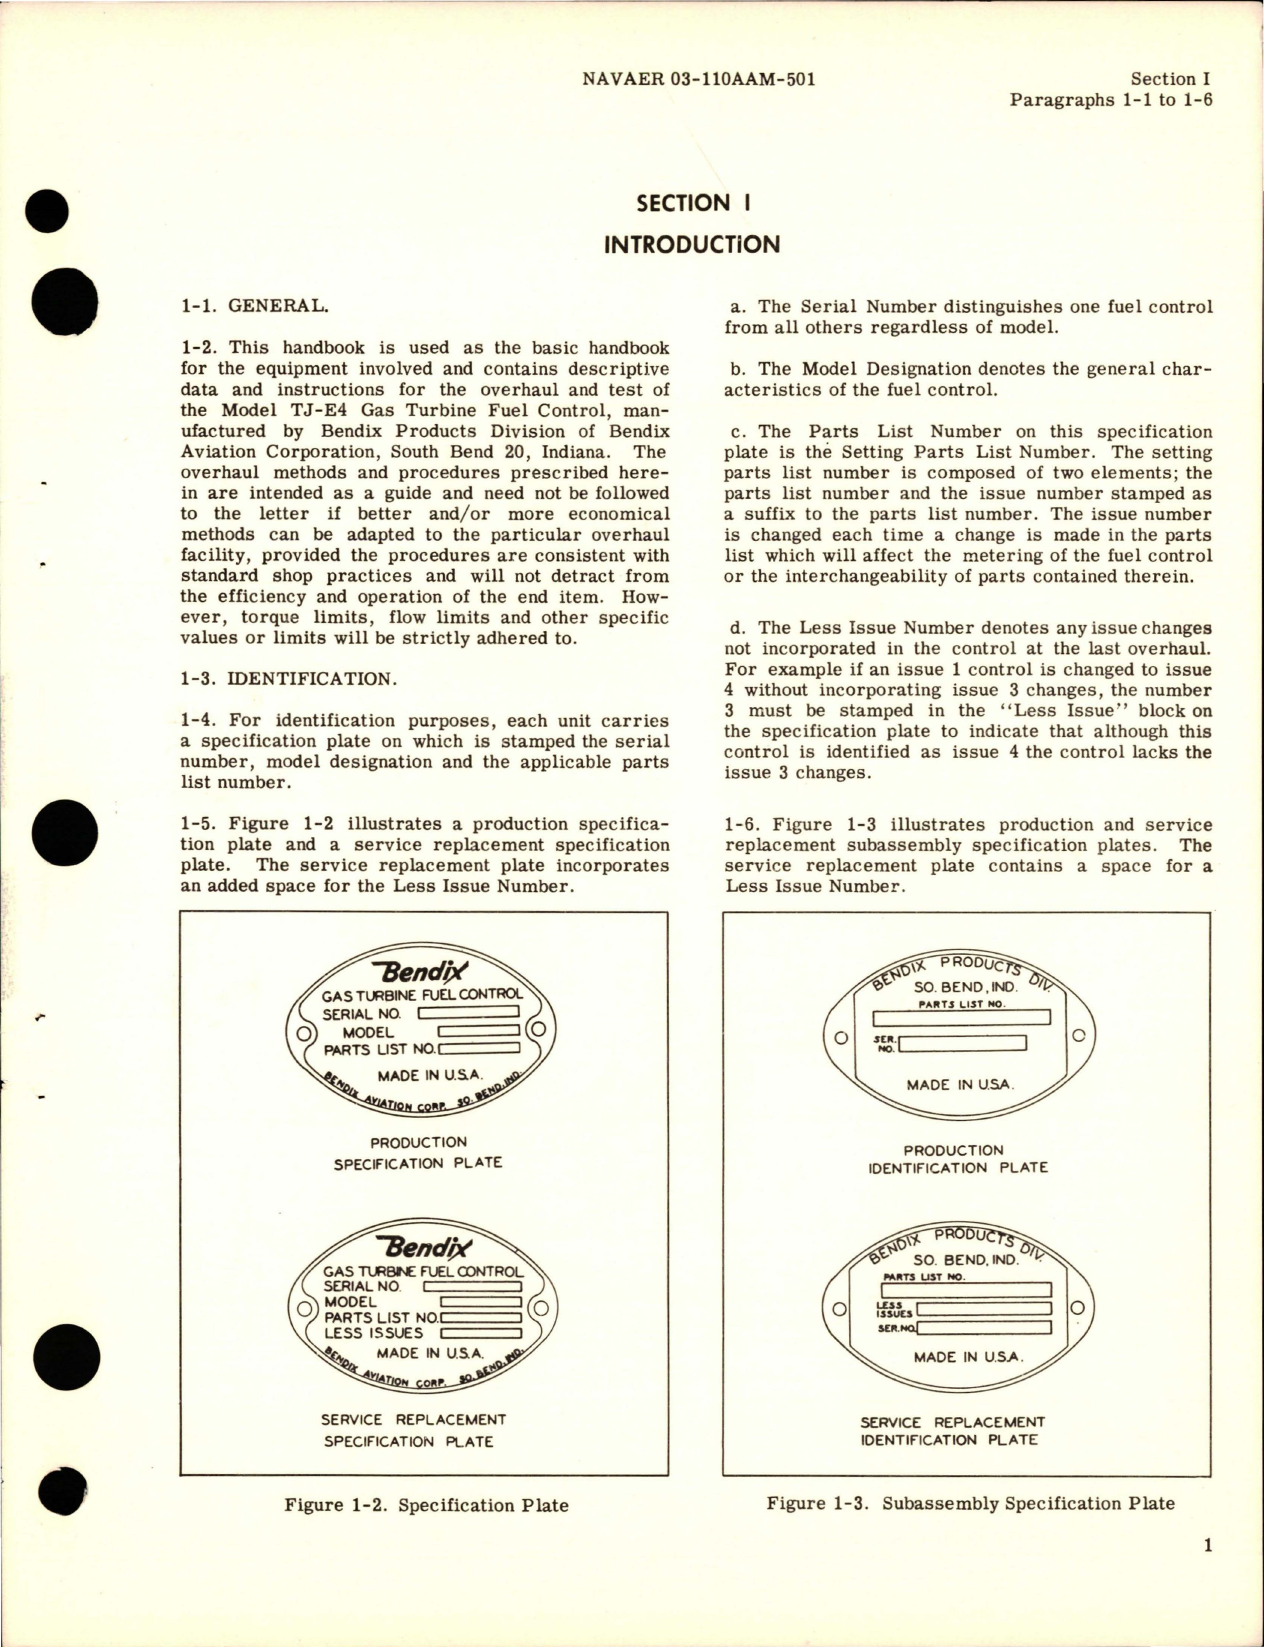 Sample page 5 from AirCorps Library document: Overhaul Instructions for Gas Turbine Fuel Control - Model TJ-E4